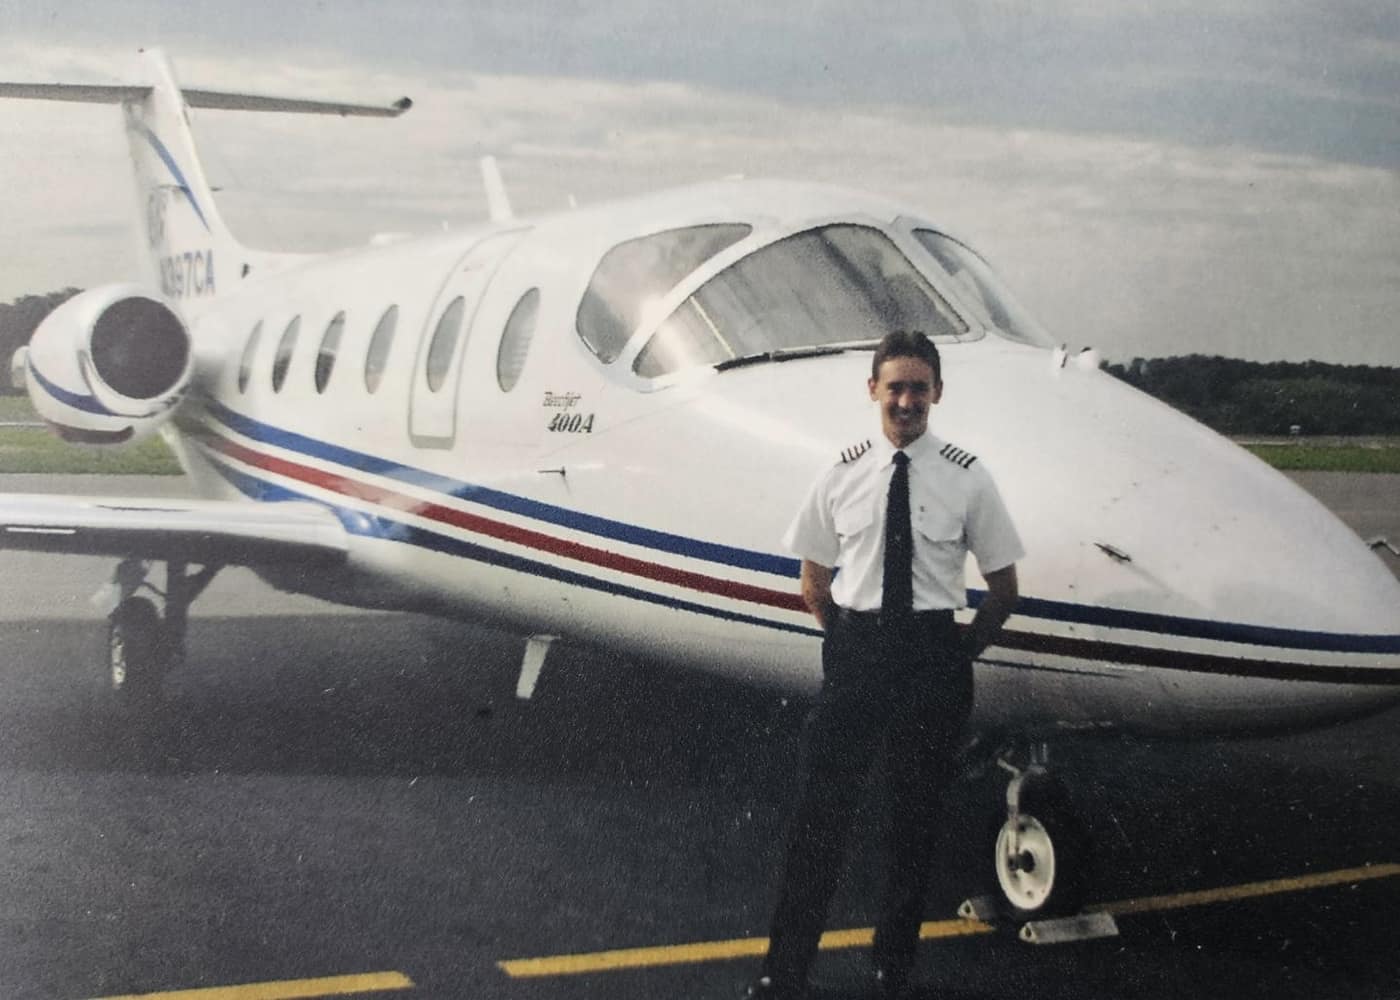 Chase, in a pilot's uniform, poses in front of a small jet.